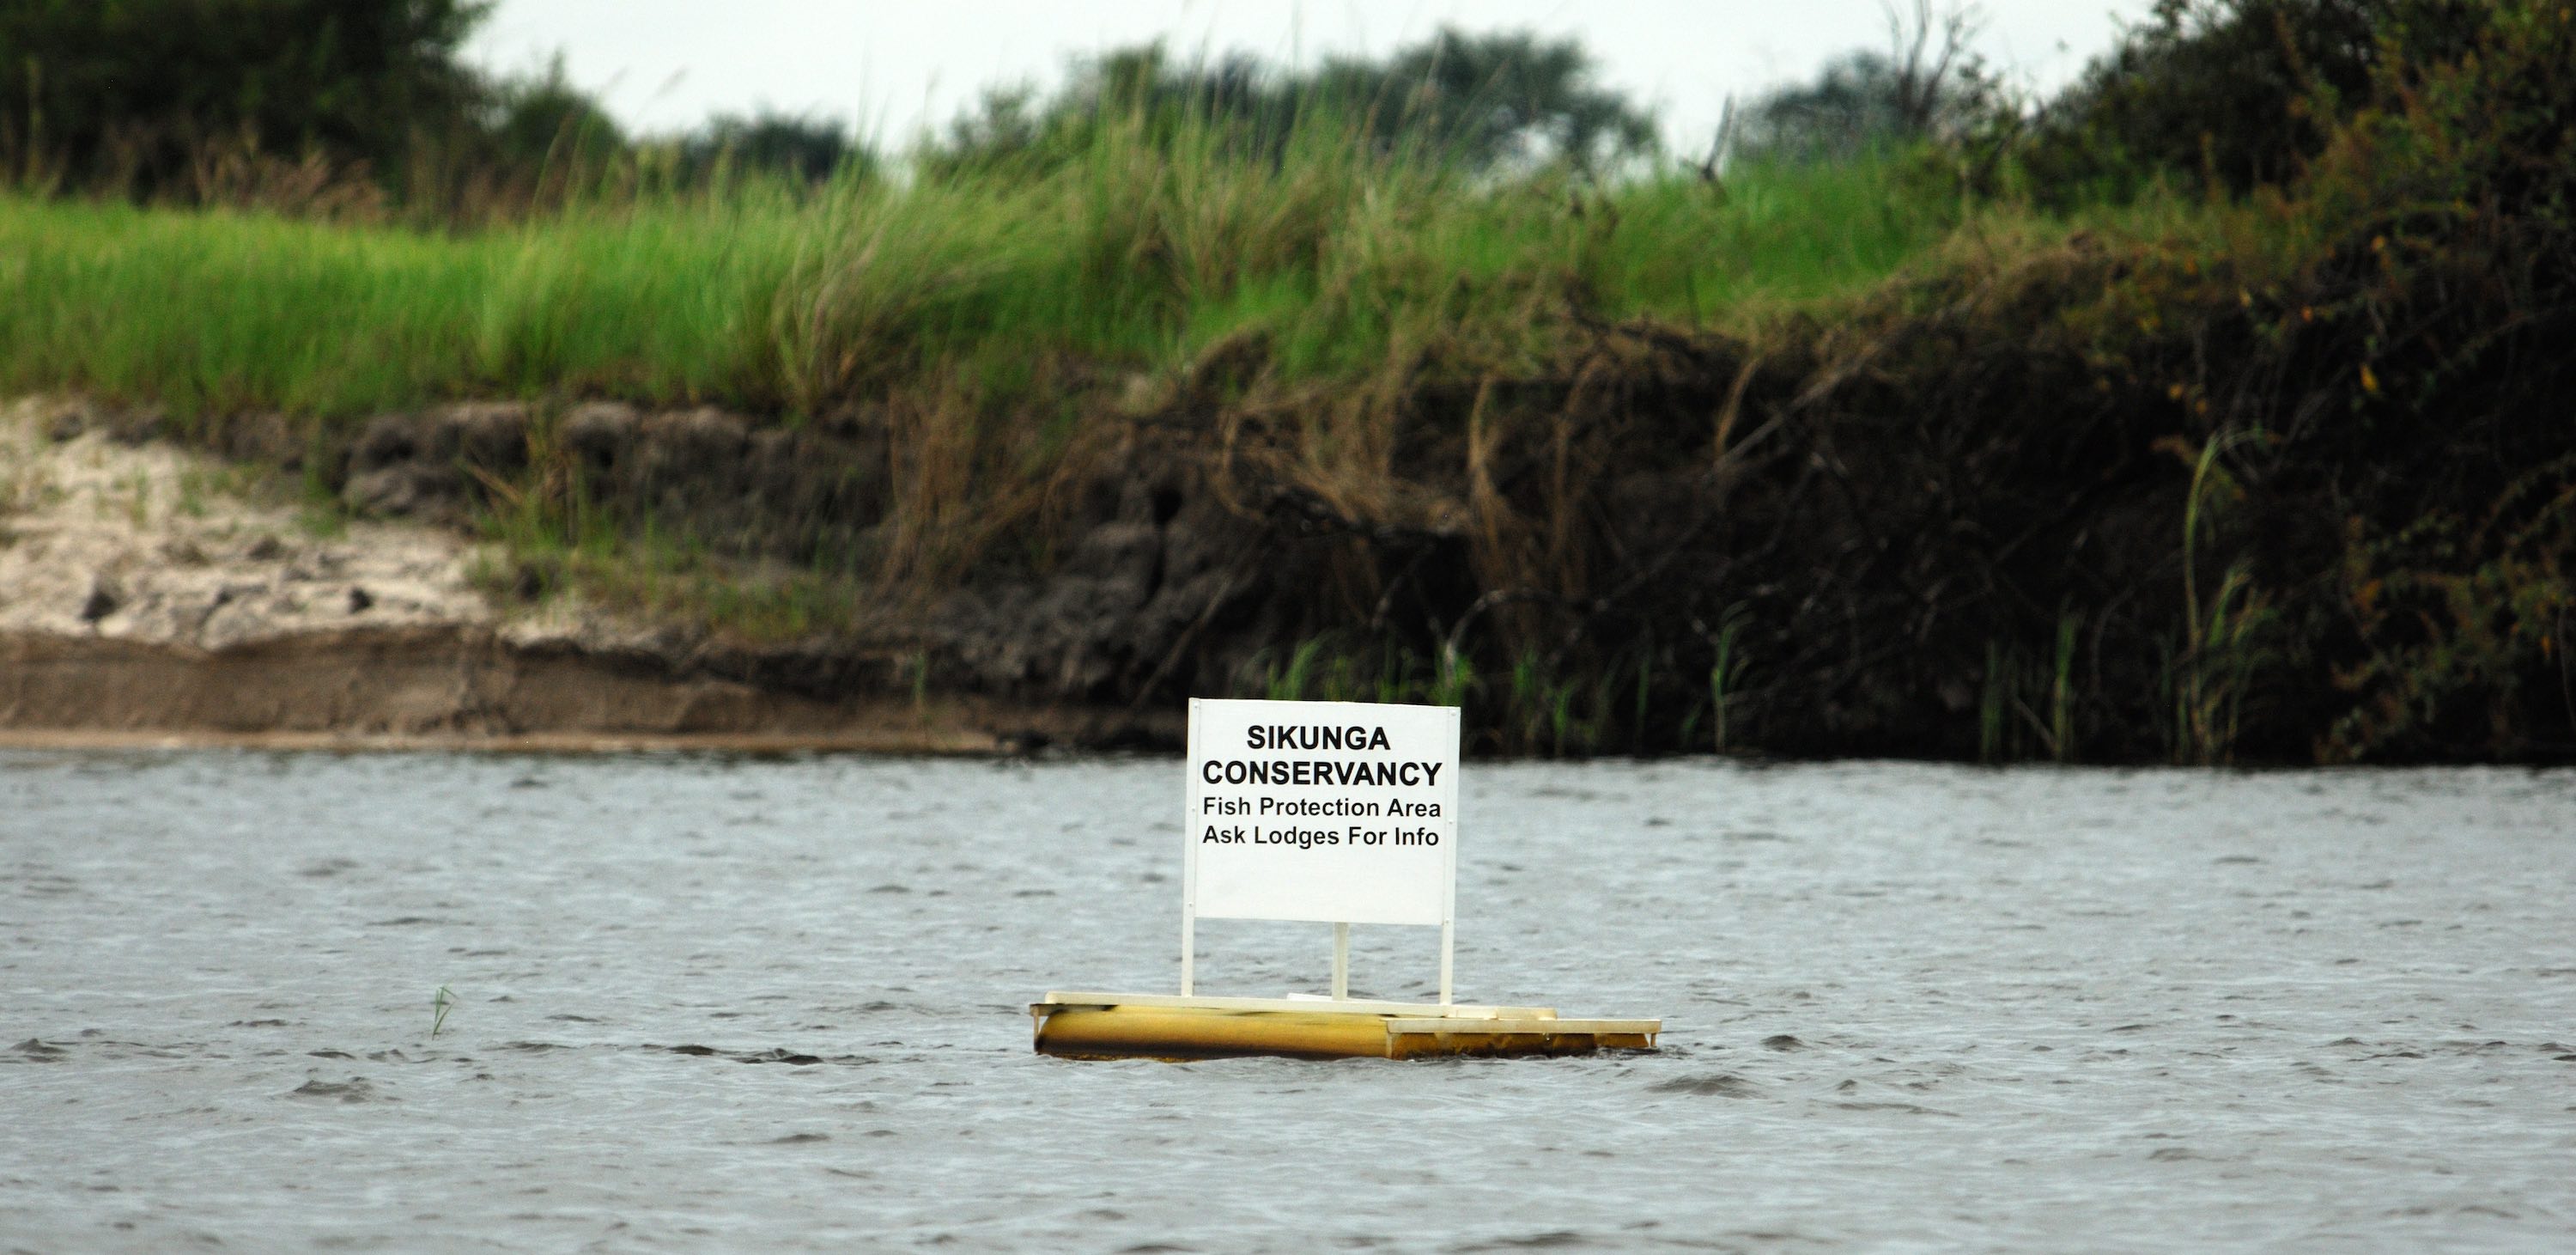 A floating sign informing about fish protection zones.